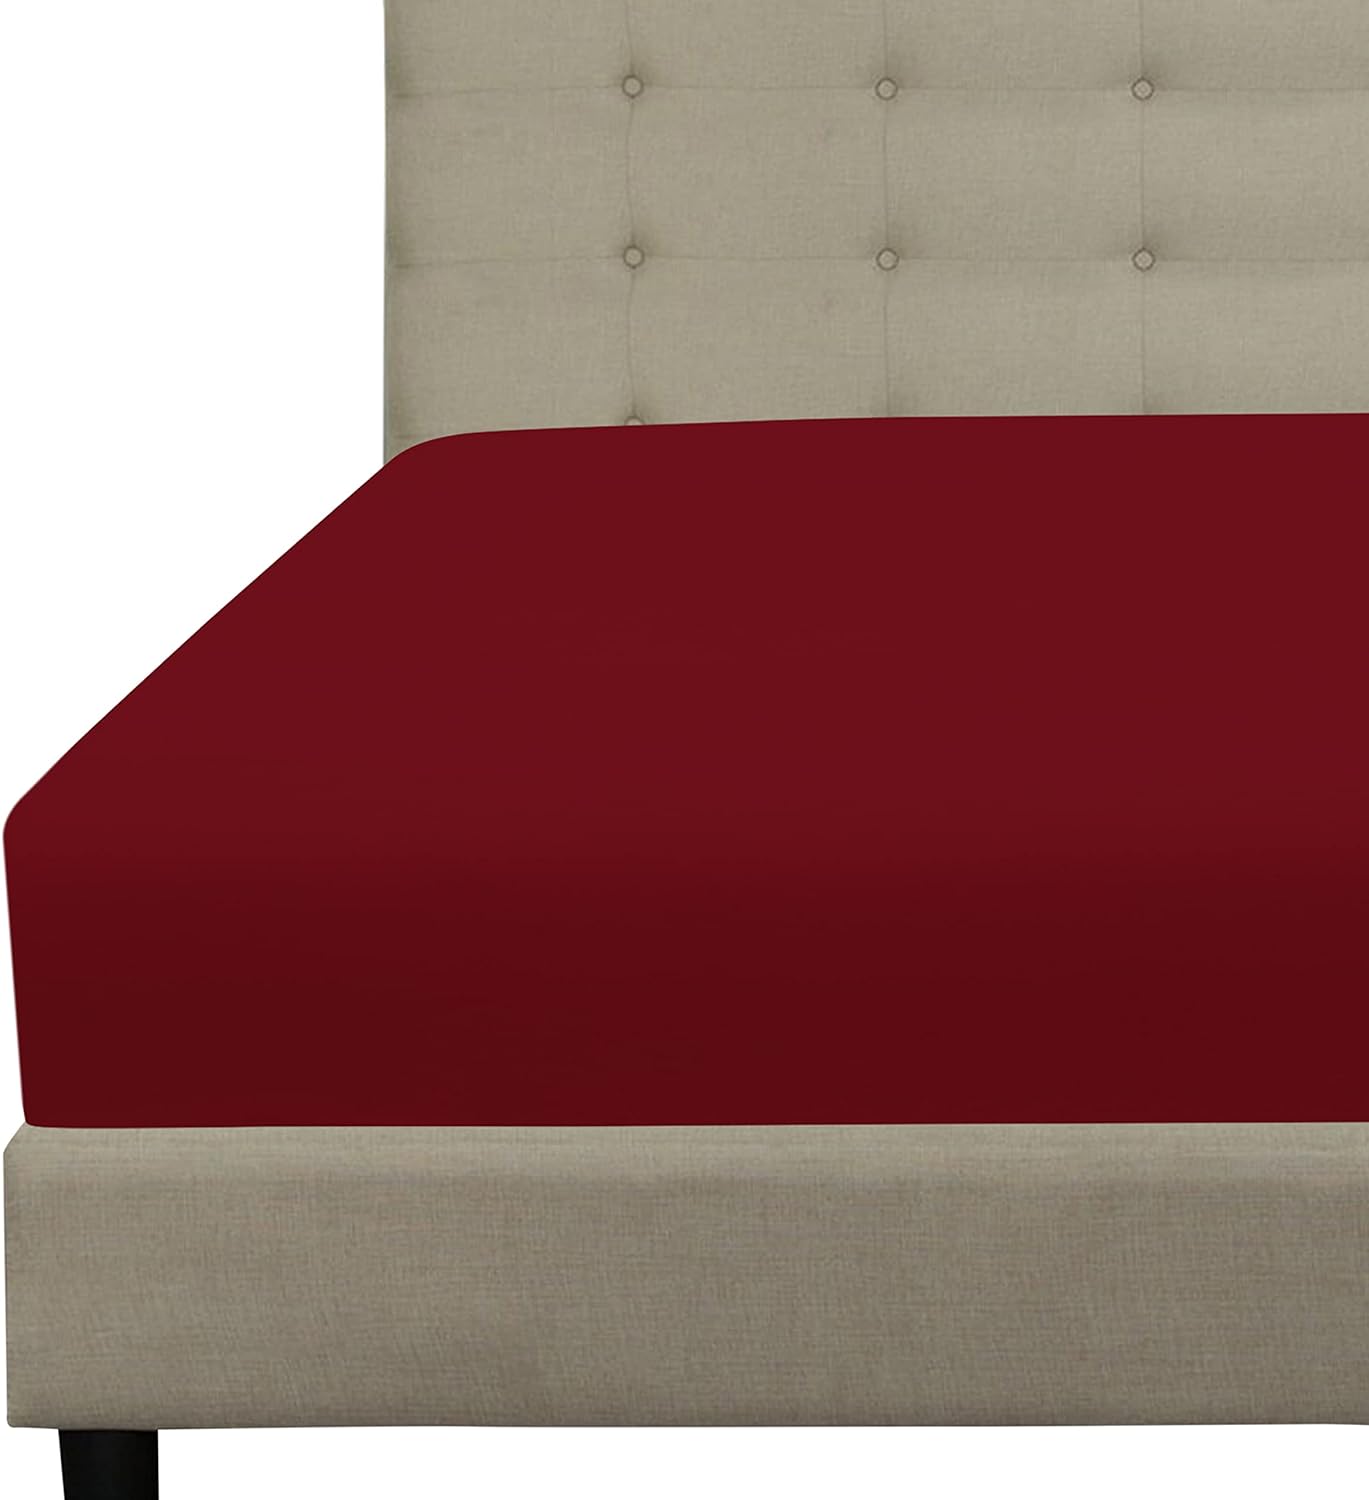 Royale Linens Fitted Sheet Queen - Brushed Hotel Quality 1800 Ultra-Soft Wrinkle & Fade Resistant - Bottom Sheet - Deep Pocket Stretches Up to 16" - Fitted Sheet Only - Elastic Sheet (Queen, Burgundy)